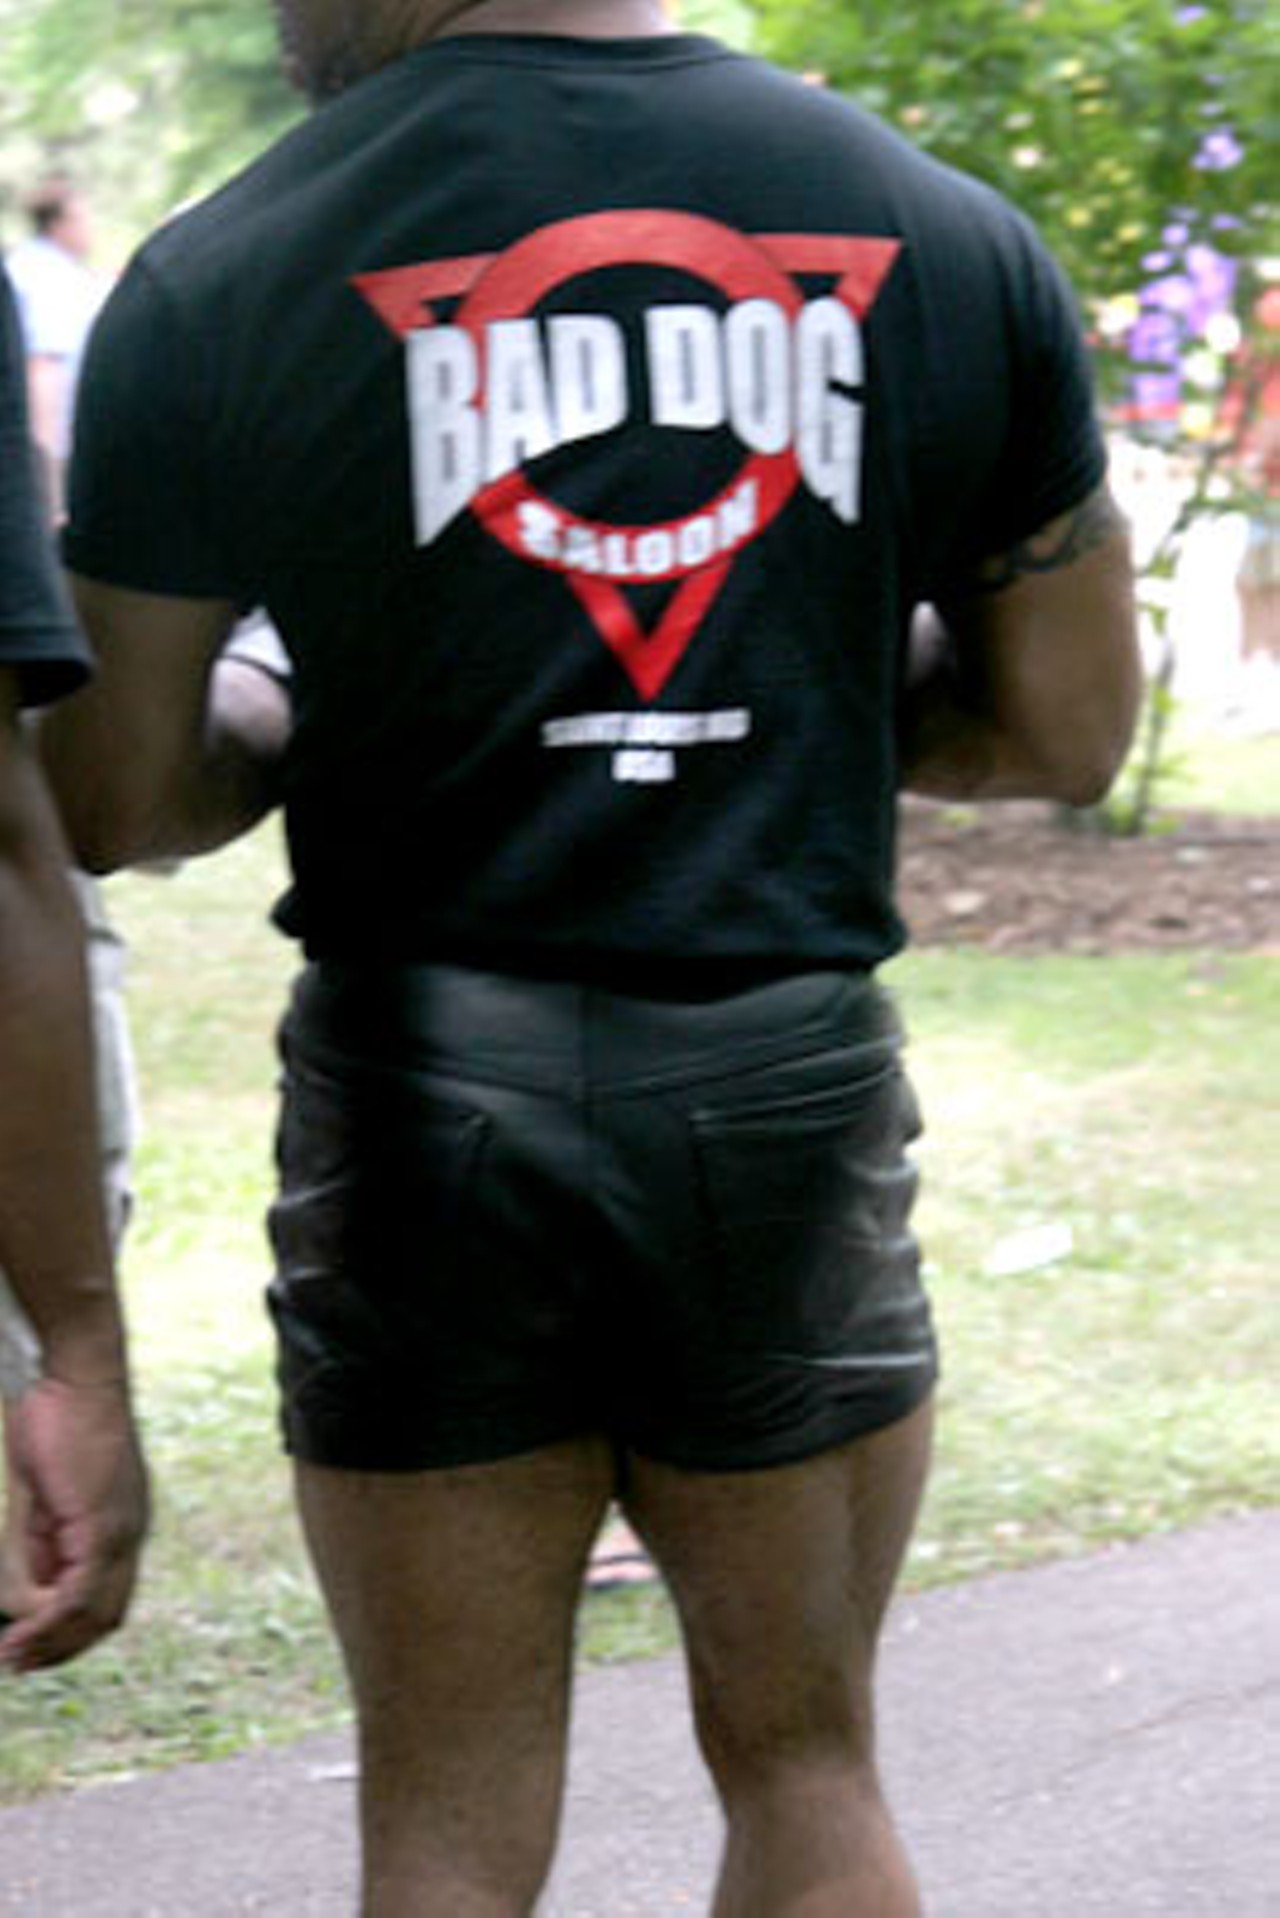 It wouldn't be Pride without some tight leather shorts.